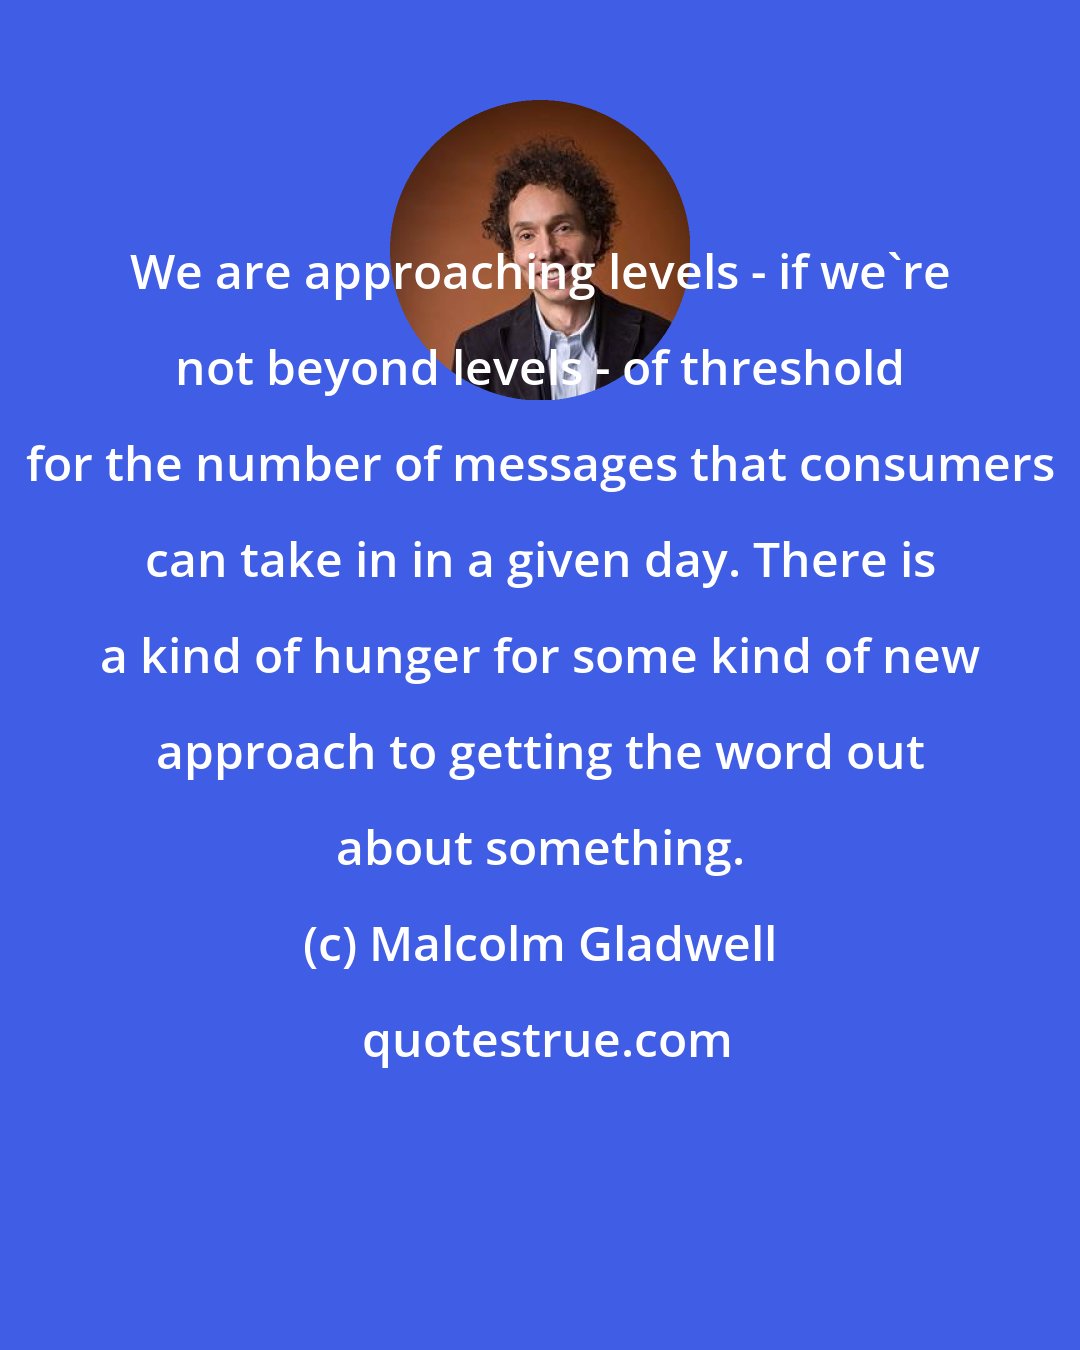 Malcolm Gladwell: We are approaching levels - if we're not beyond levels - of threshold for the number of messages that consumers can take in in a given day. There is a kind of hunger for some kind of new approach to getting the word out about something.